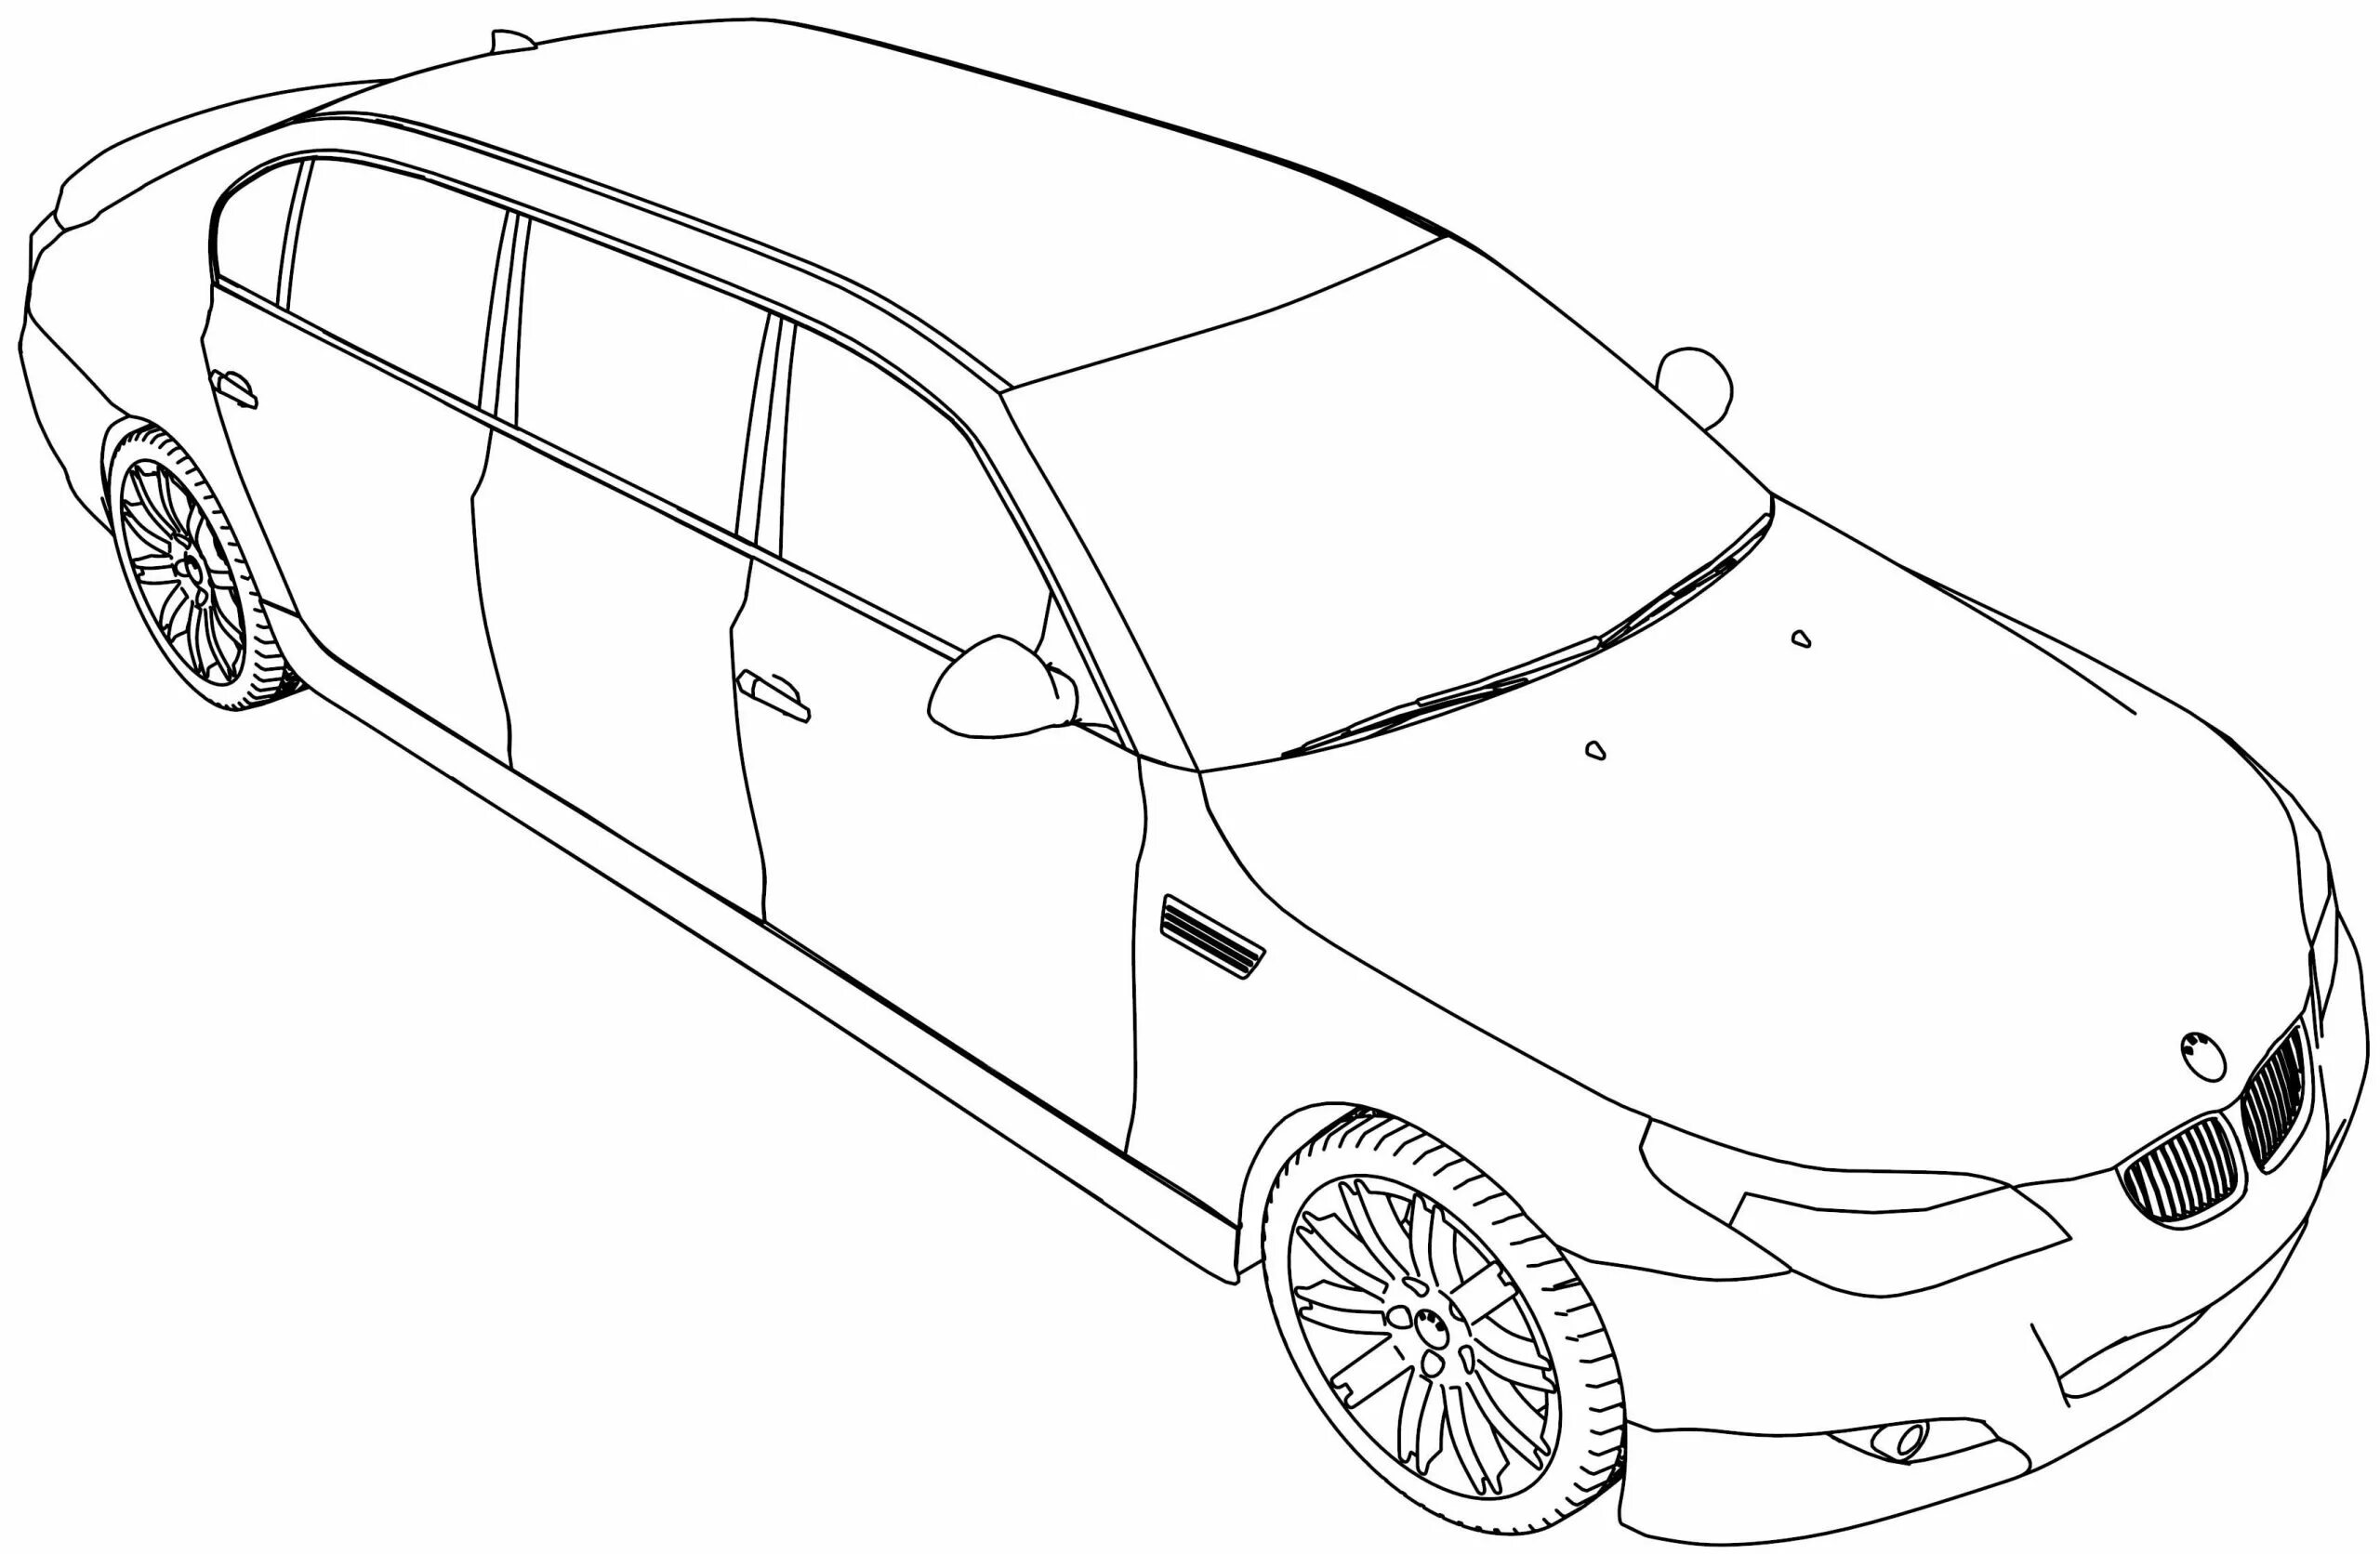 Shining limousine coloring pages for kids